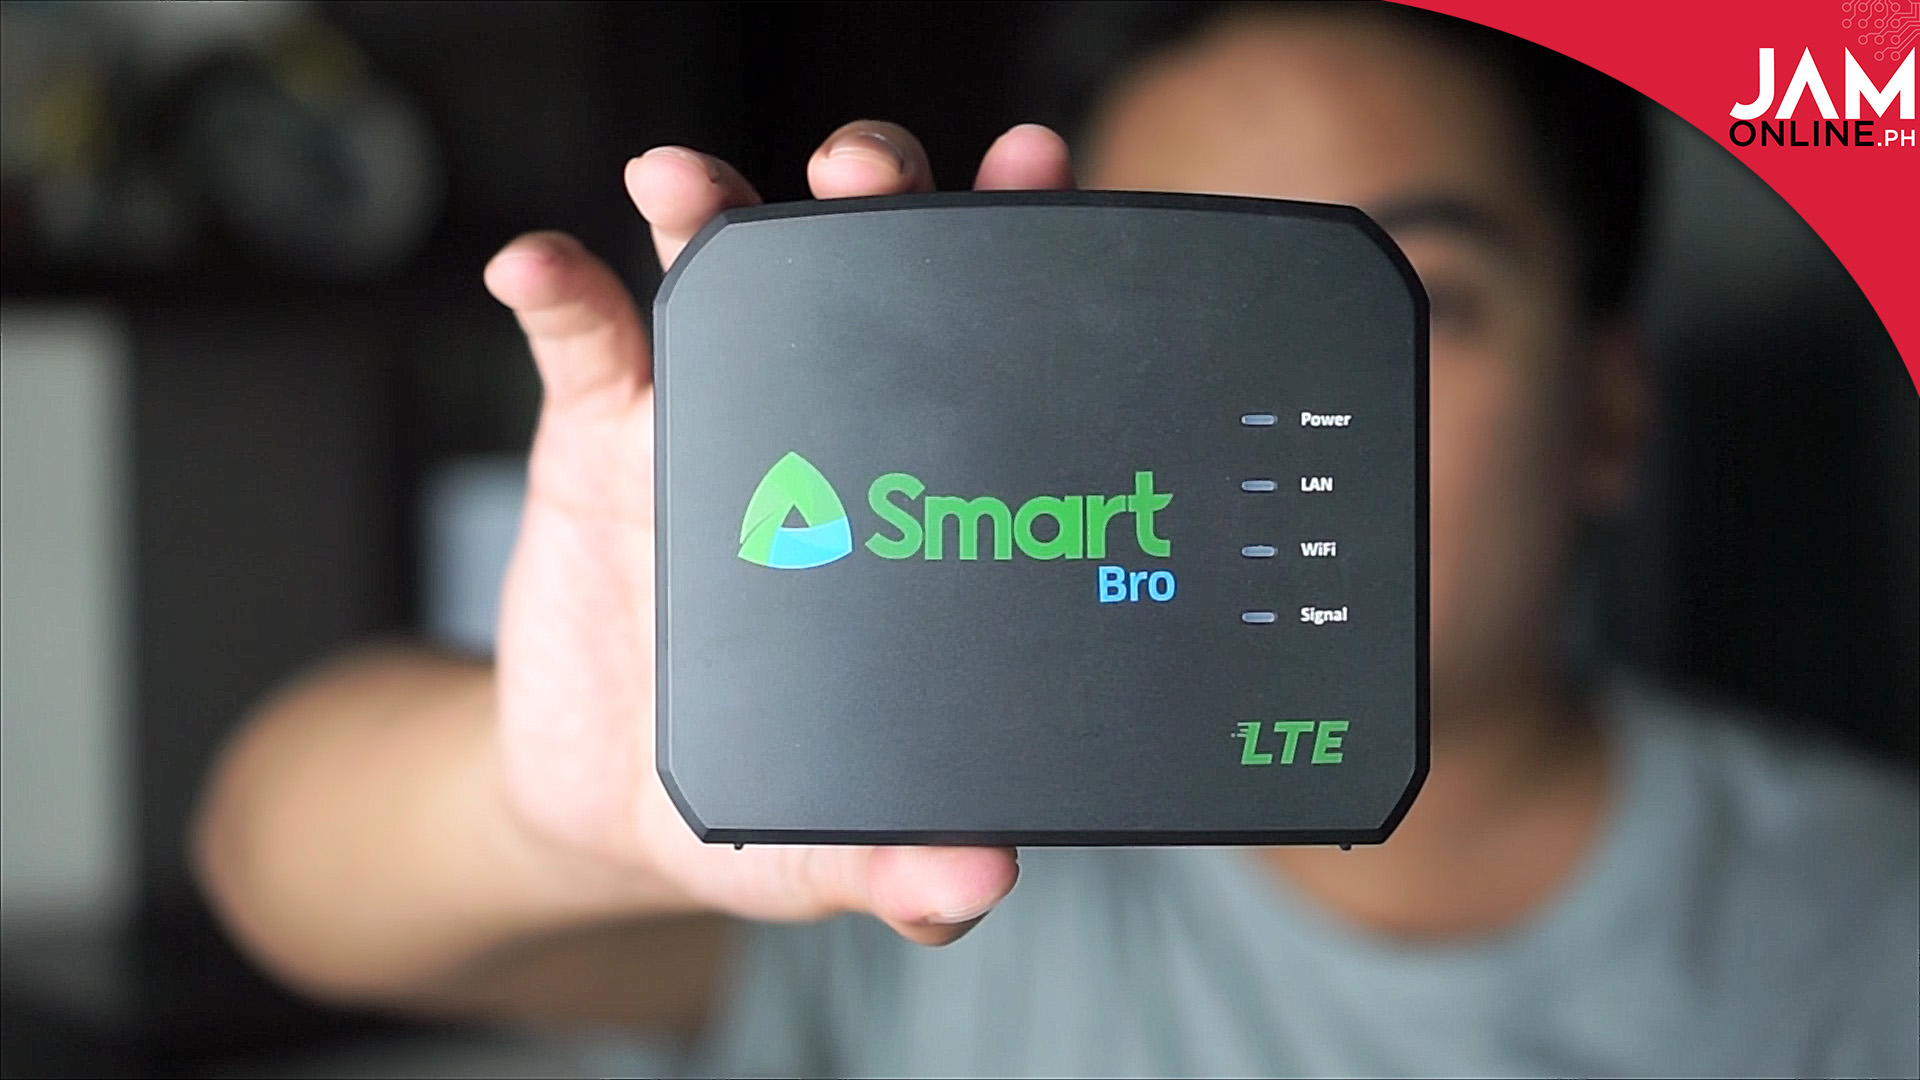 Smart Bro Home Boost 15 offers 1GB for 1 day for only Php15 - Jam